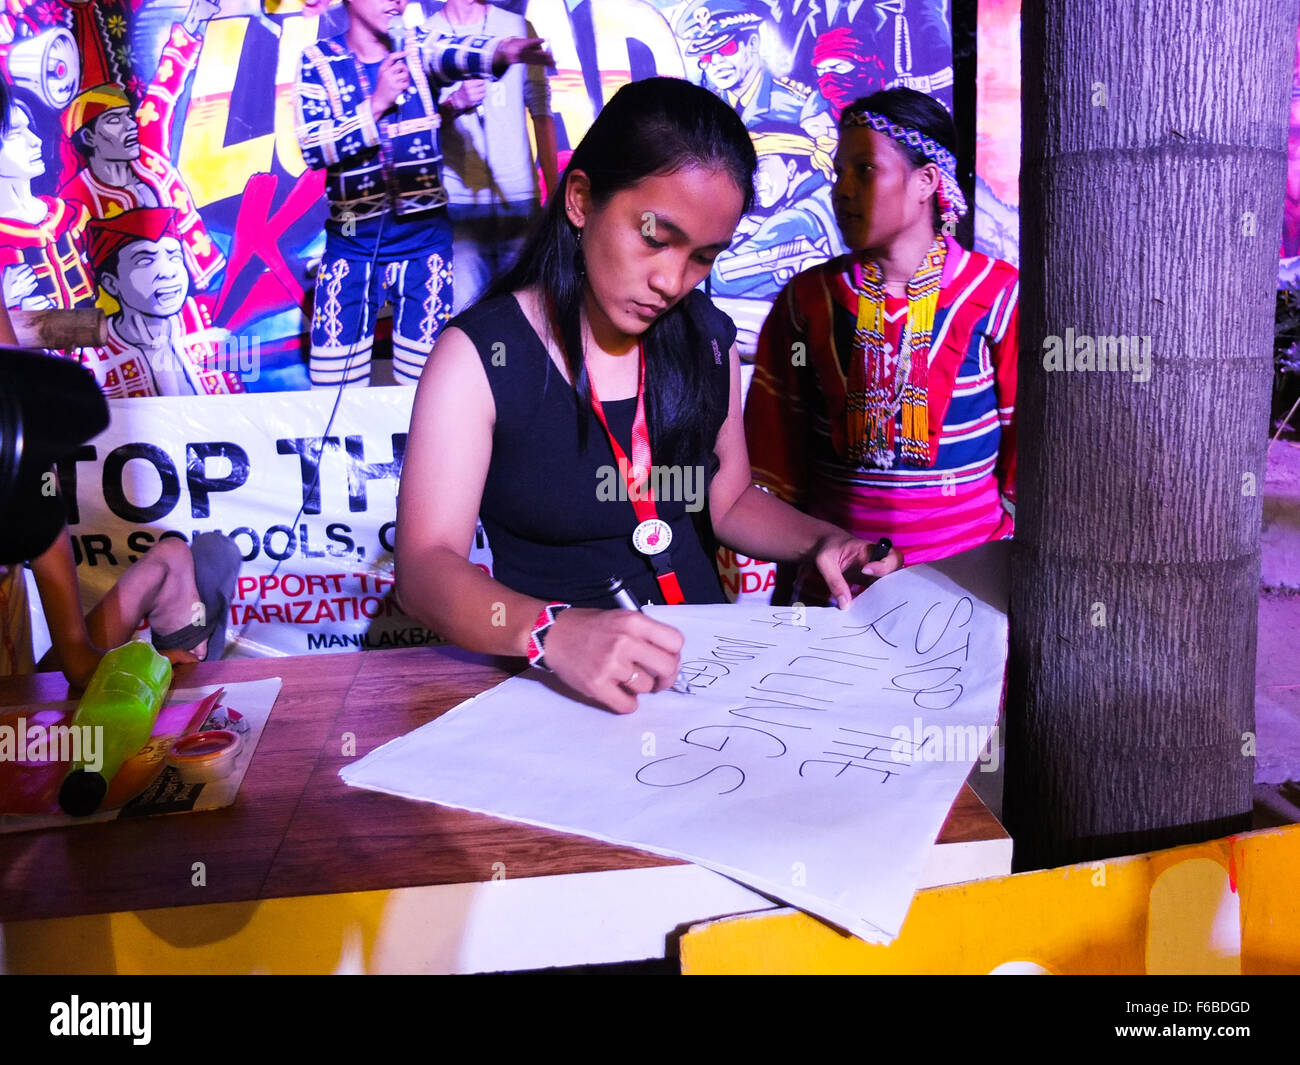 A woman organizer of the event, writing on a placard, stop the killings of the Lumads. The Lumad peoples are a group of indigenous people of the southern Philippines. It is a Cebuano term meaning 'native' or 'indigenous'. The term is short for Katawhang Lumad (literally 'indigenous peoples'), the autonym officially adopted by the delegates of the Lumad Mindanao Peoples Federation (LMPF) founding assembly on 26 June 1986 at the Guadalupe Formation Center, Balindog, Kidapawan, Cotabato, Philippines. It is the self-ascription and collective identity of the indigenous peoples of Mindanao. (Photo b Stock Photo